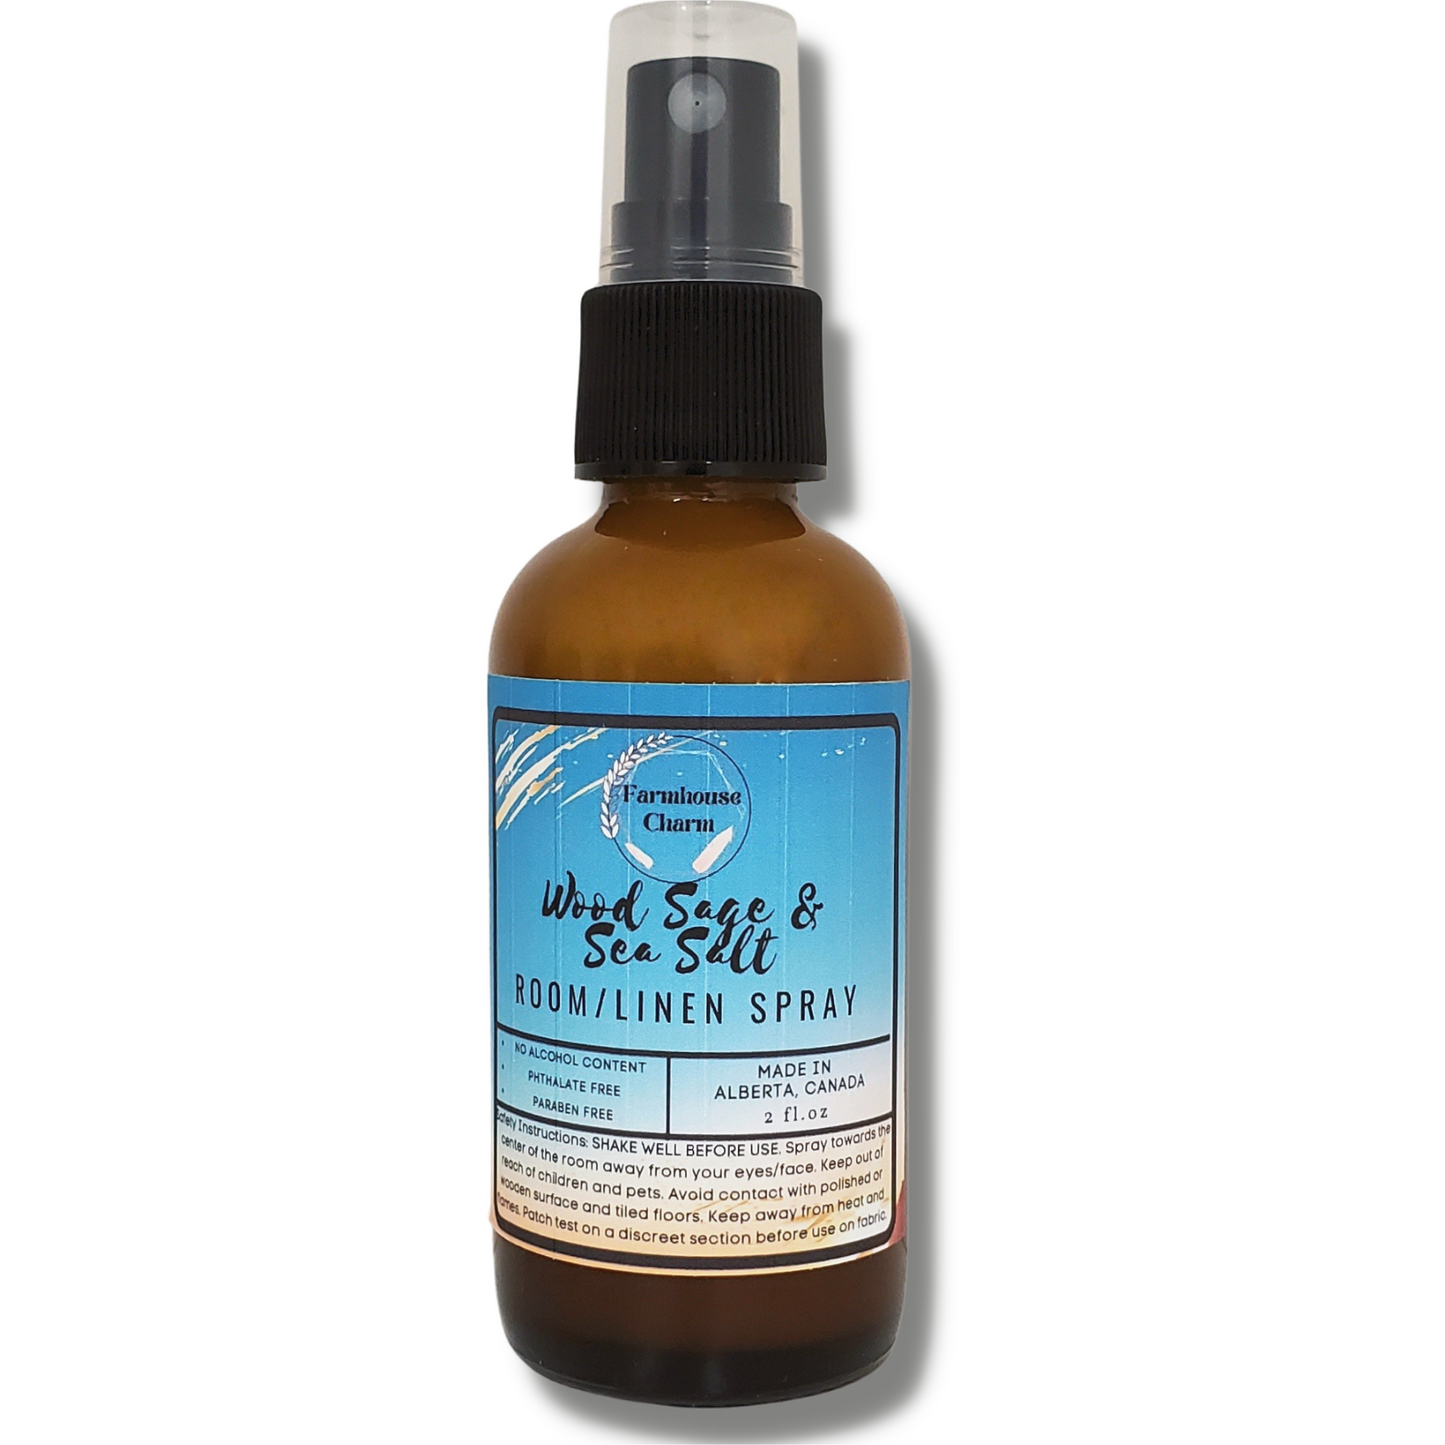 A truly refreshing scent! Wood Sage & Sea Salt Room and Linen Spray- Farmhouse Charm has a top note of soft floral and elegant musk. The scent is then followed by subtle spray of sea salt. The bottom note is sensual woody amber.  Wood Sage & Sea Salt Room and Linen Spray- Farmhouse Charm  Net Weight: 2 oz No Alcohol Content Phthalate Free Paraben Free